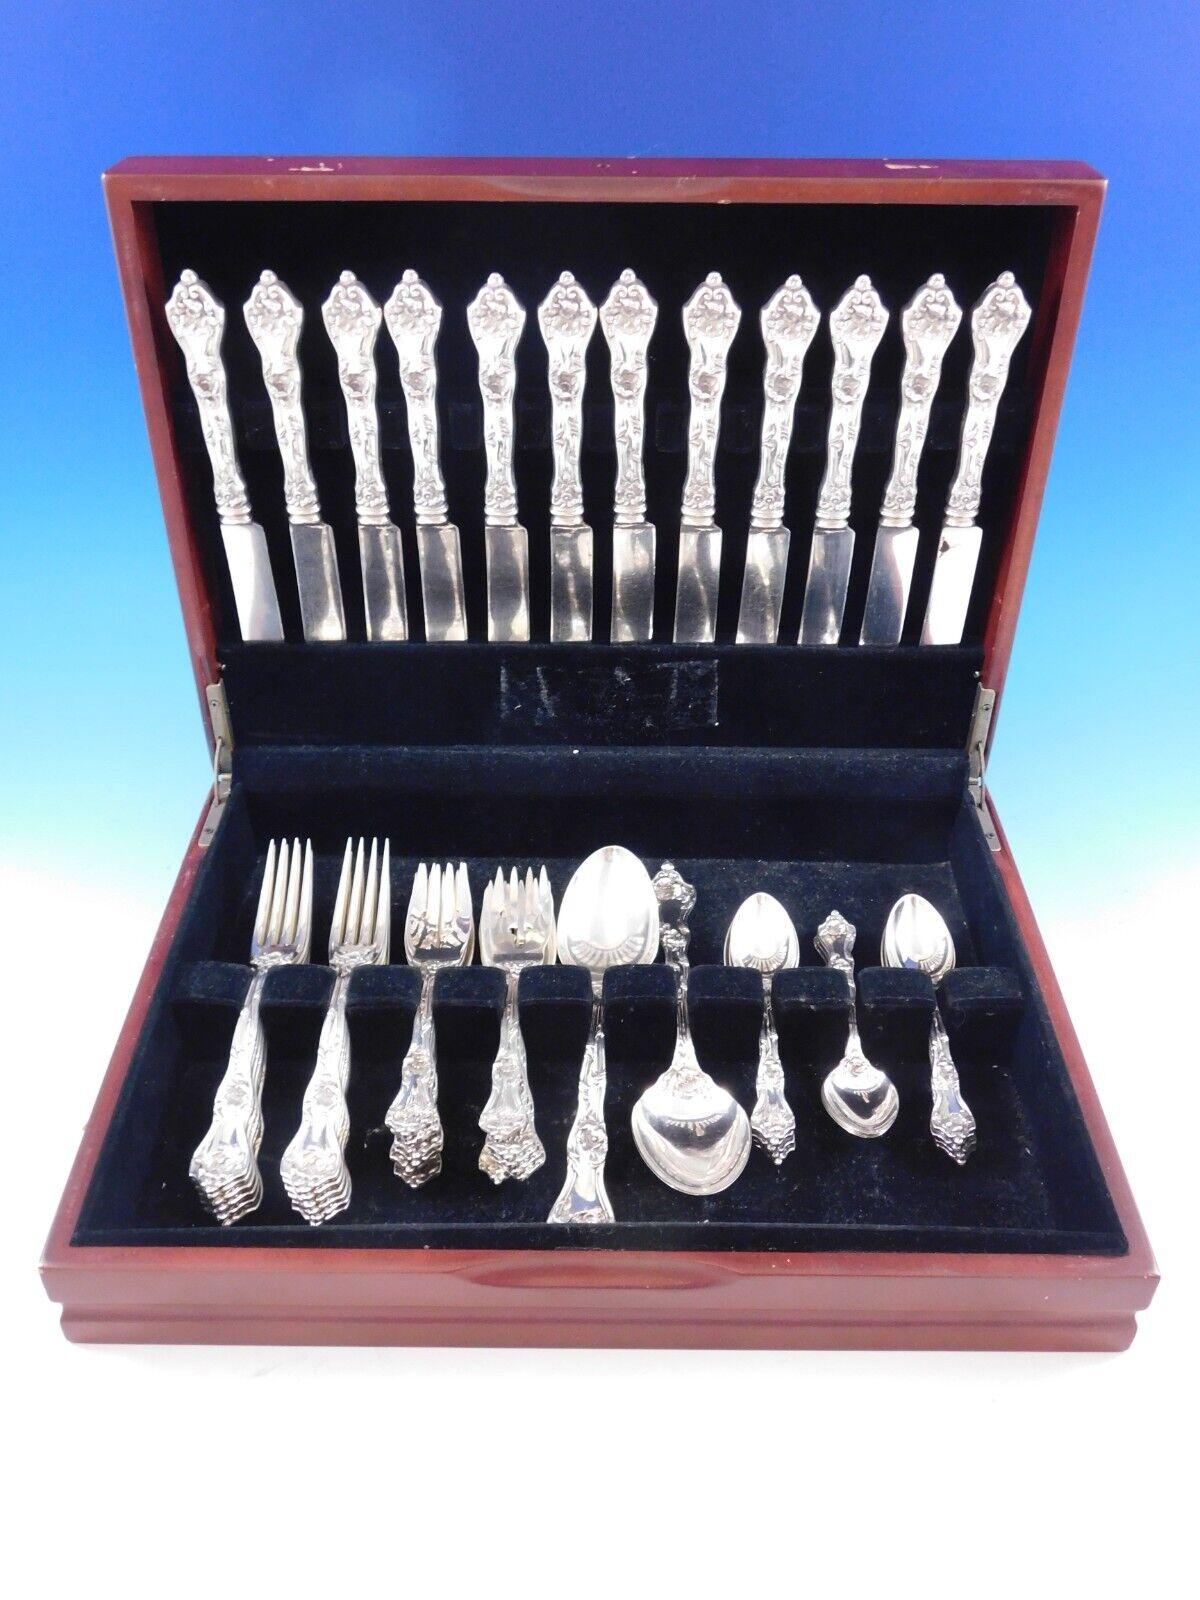 Incredible Intaglio by Reed and Barton sterling silver Flatware set, 50 pieces. This set includes:

12 Knives, 9